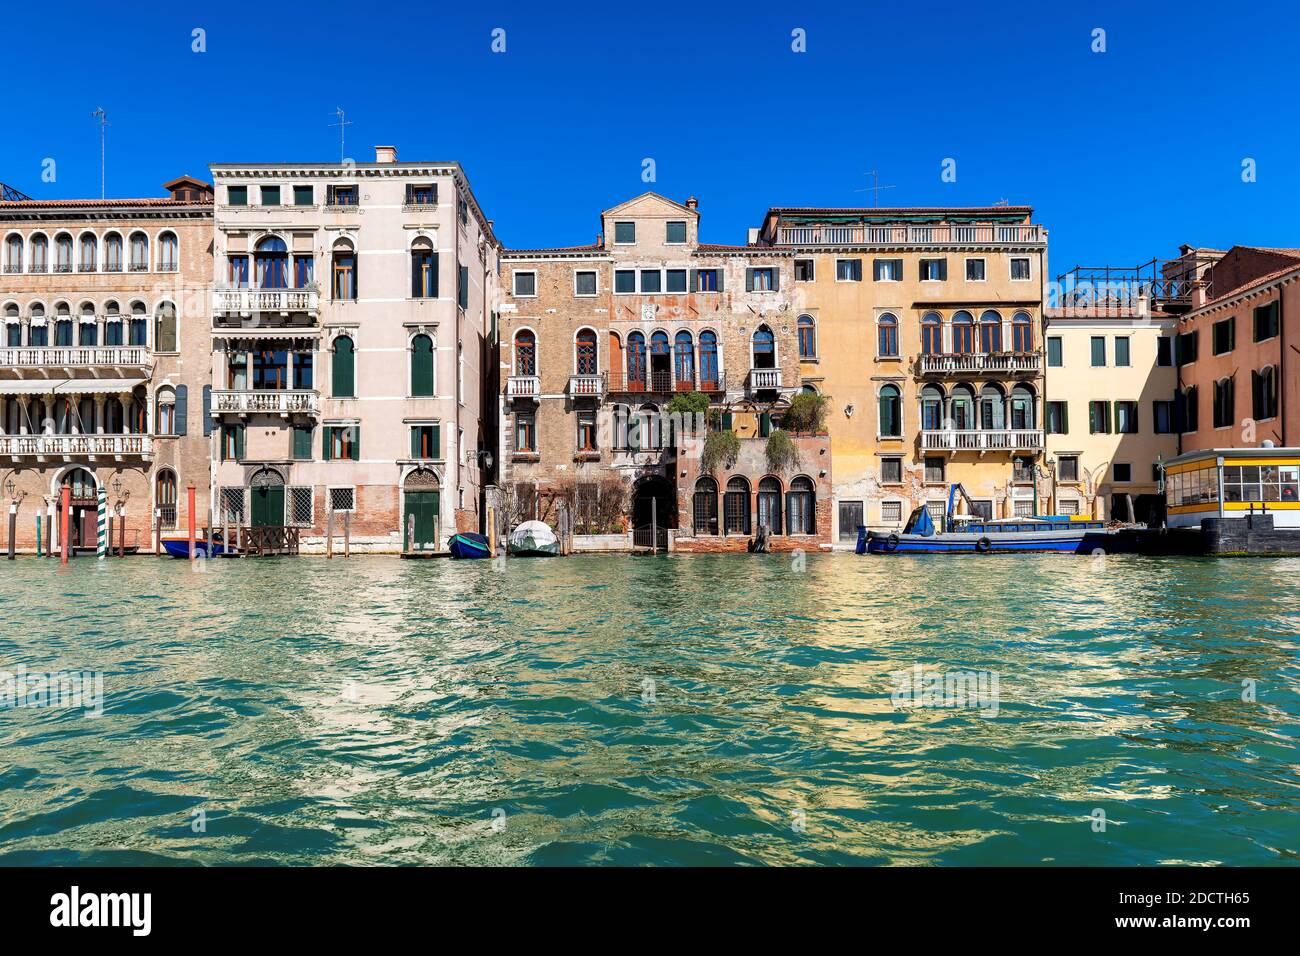 Architecture of Venetian Canal in Venice, Italy Stock Photo